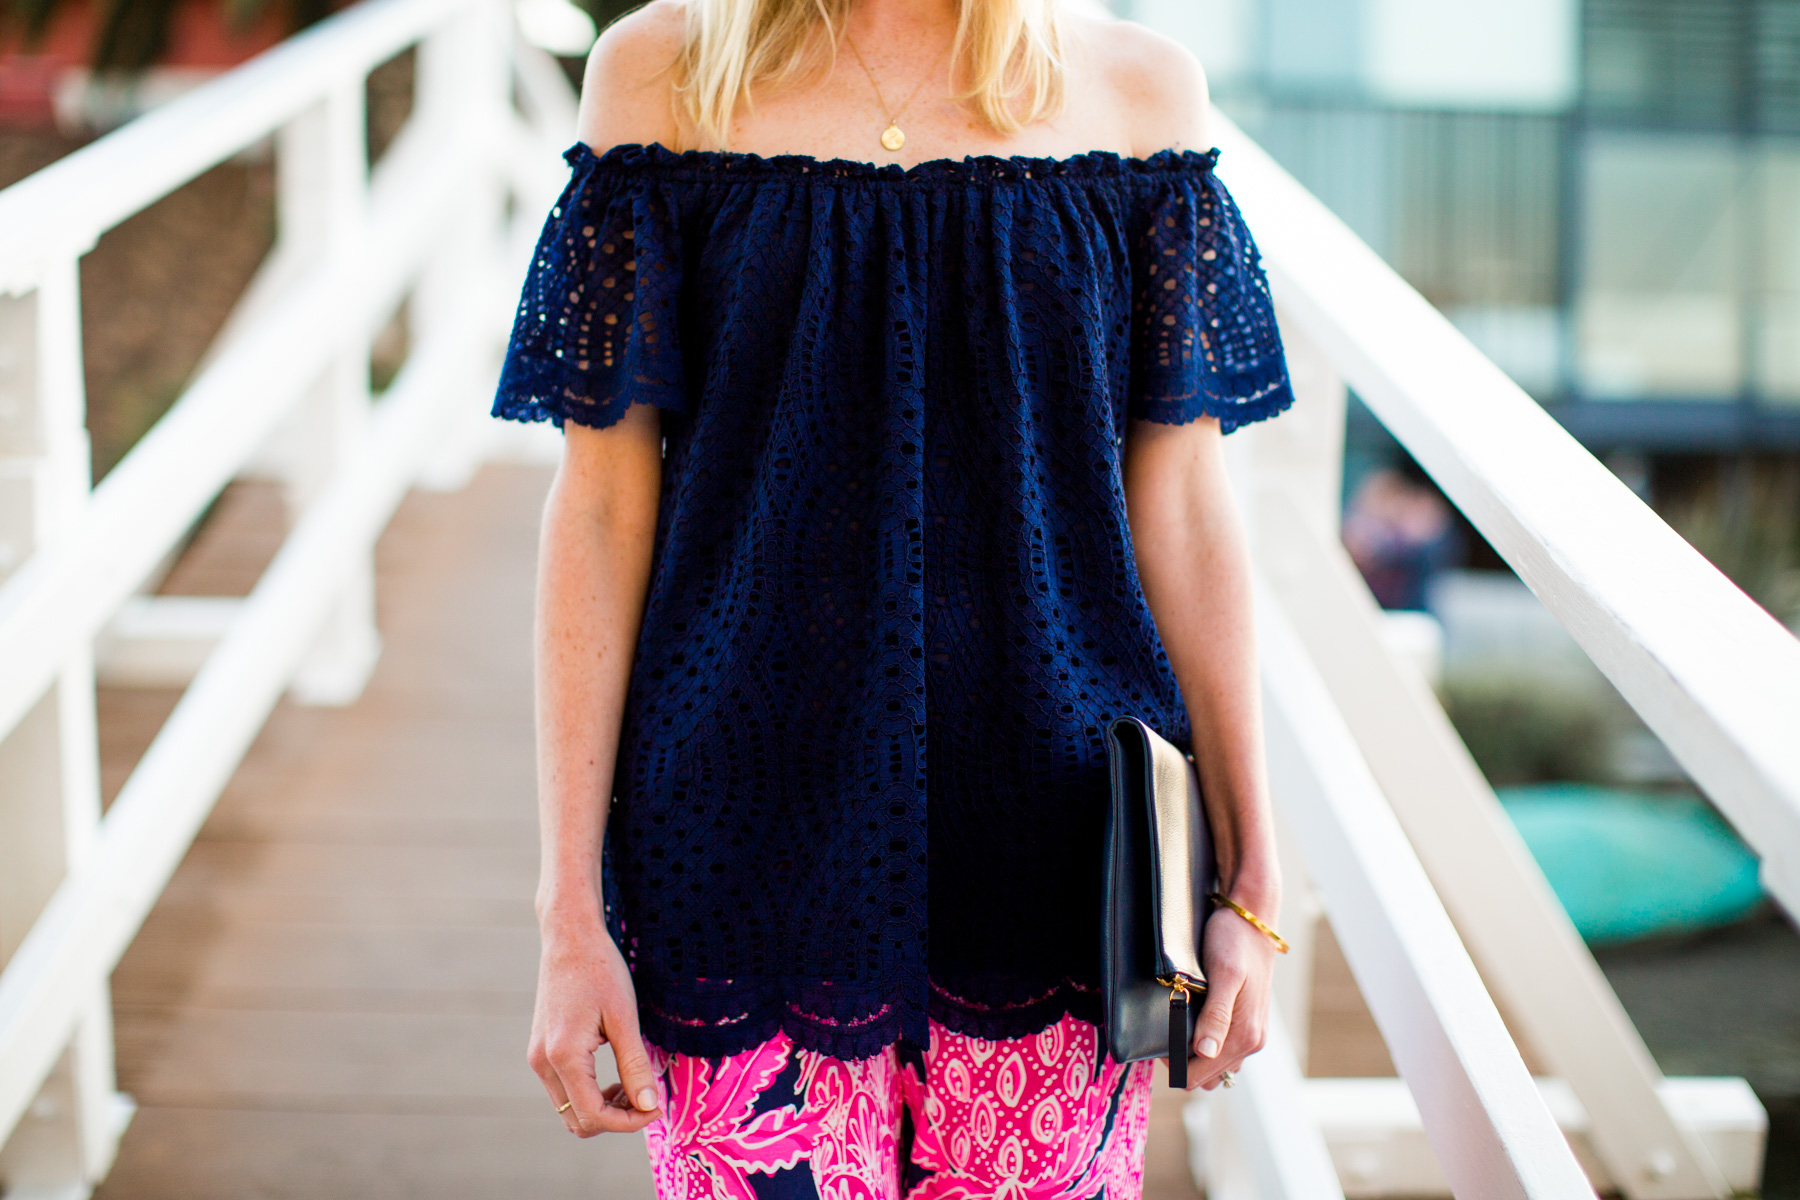 Lilly Pulitzer Pants and Off-the-Shoulder Top / Everlane Clutch 